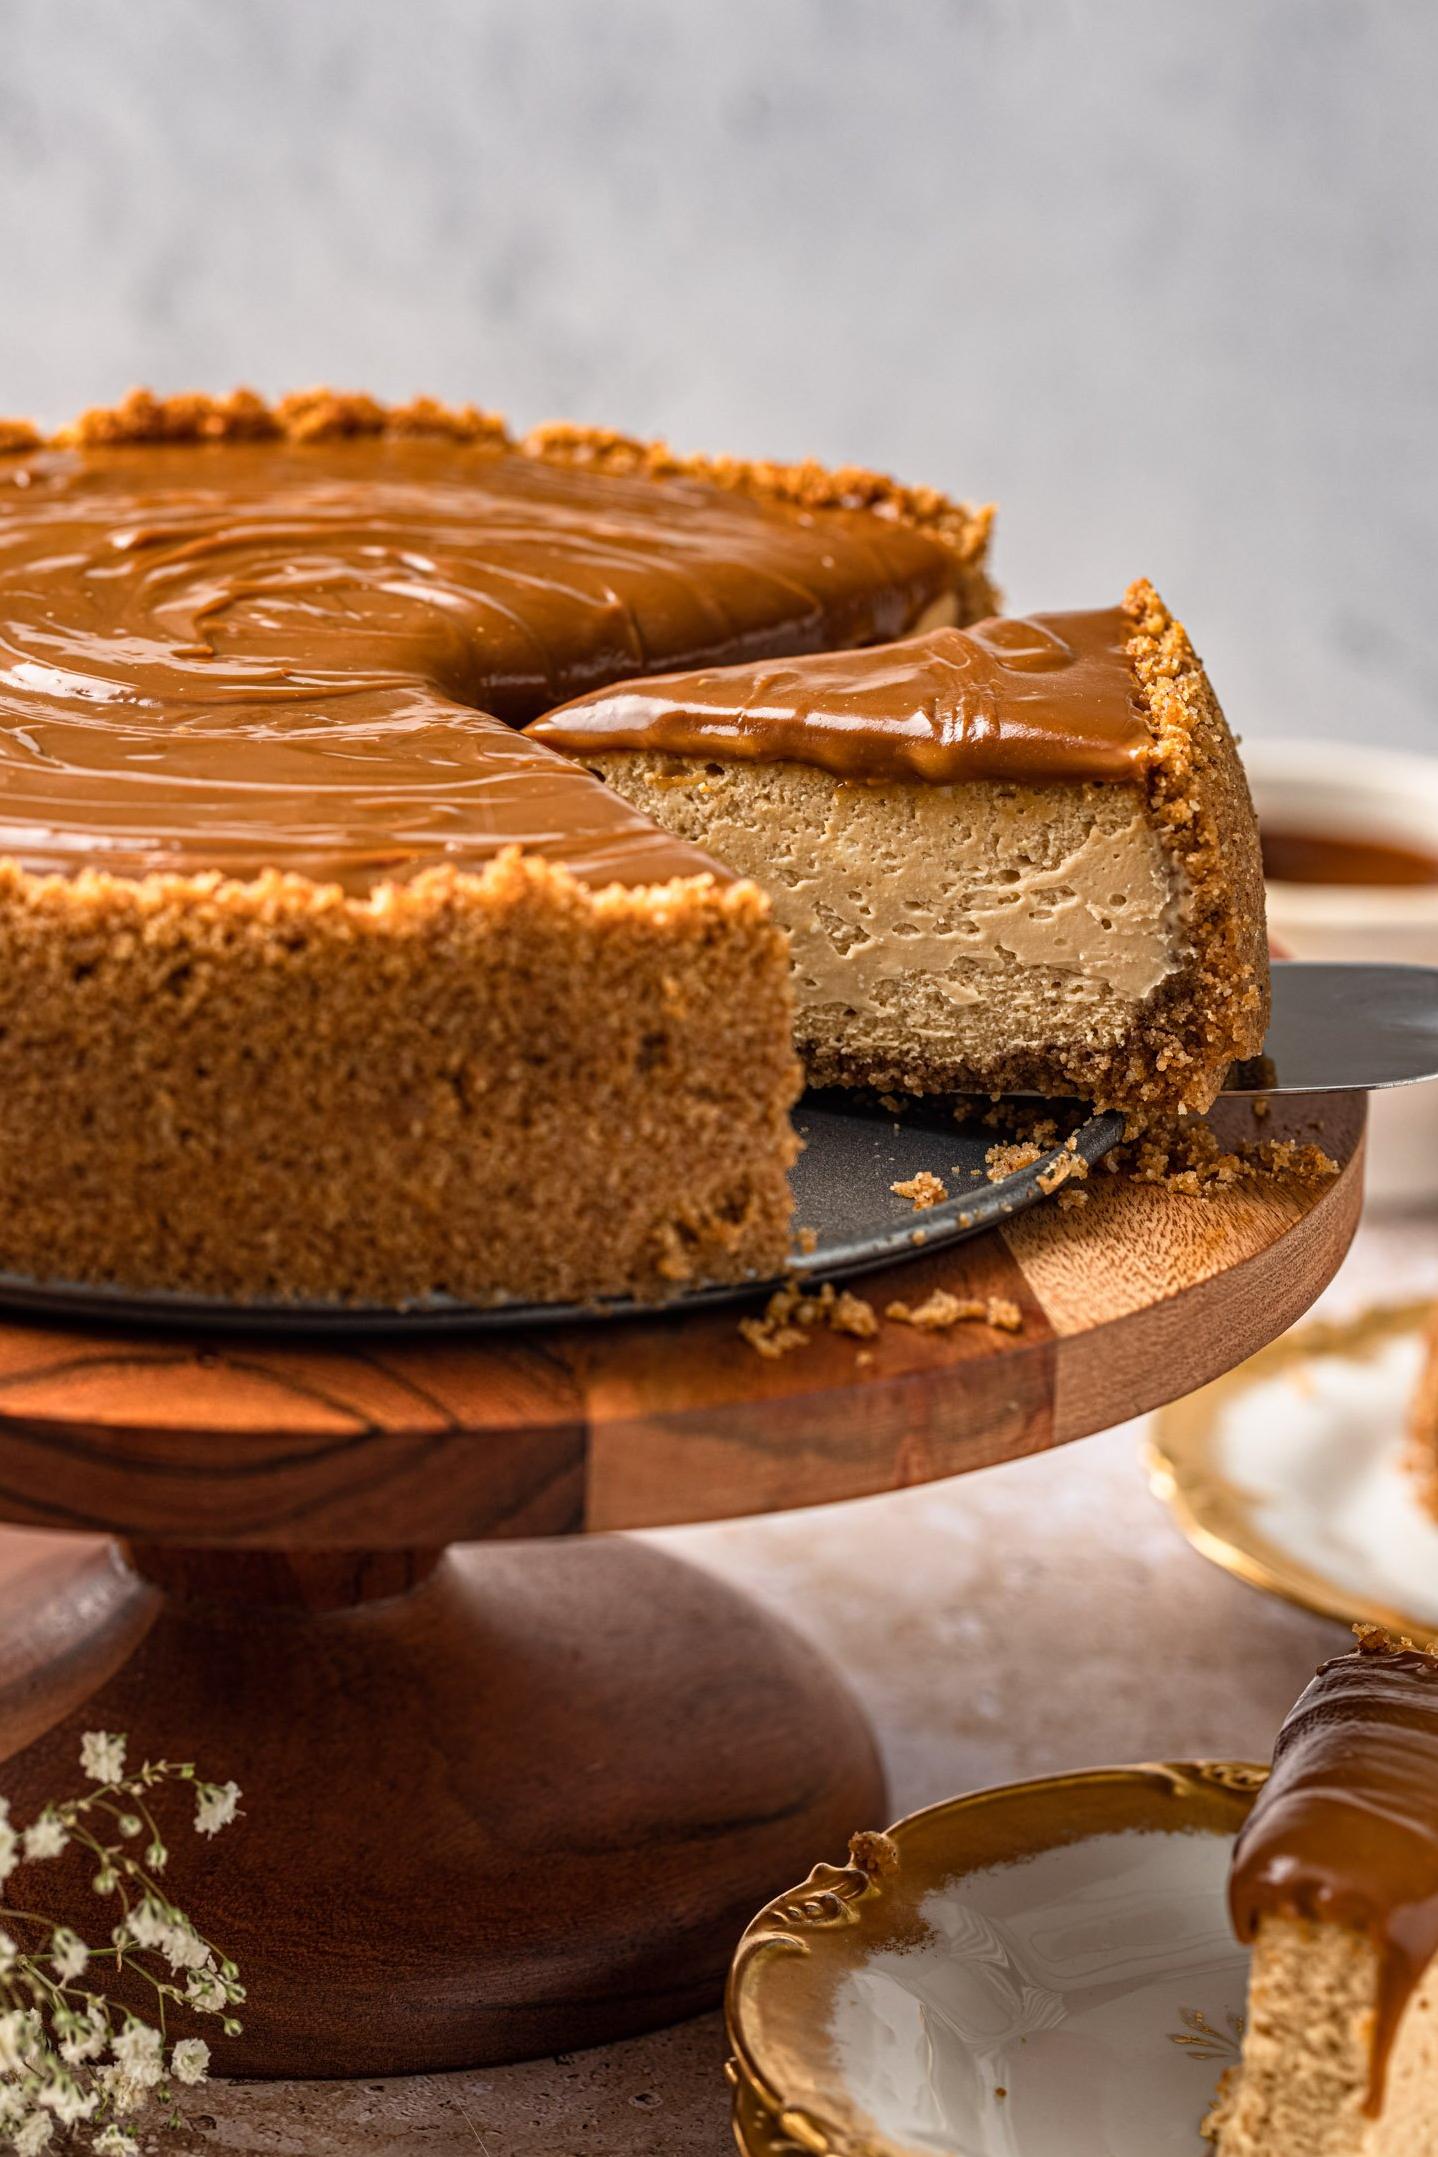  The perfect balance of creamy and tangy cheesecake topped with indulgent dulce de leche sauce!